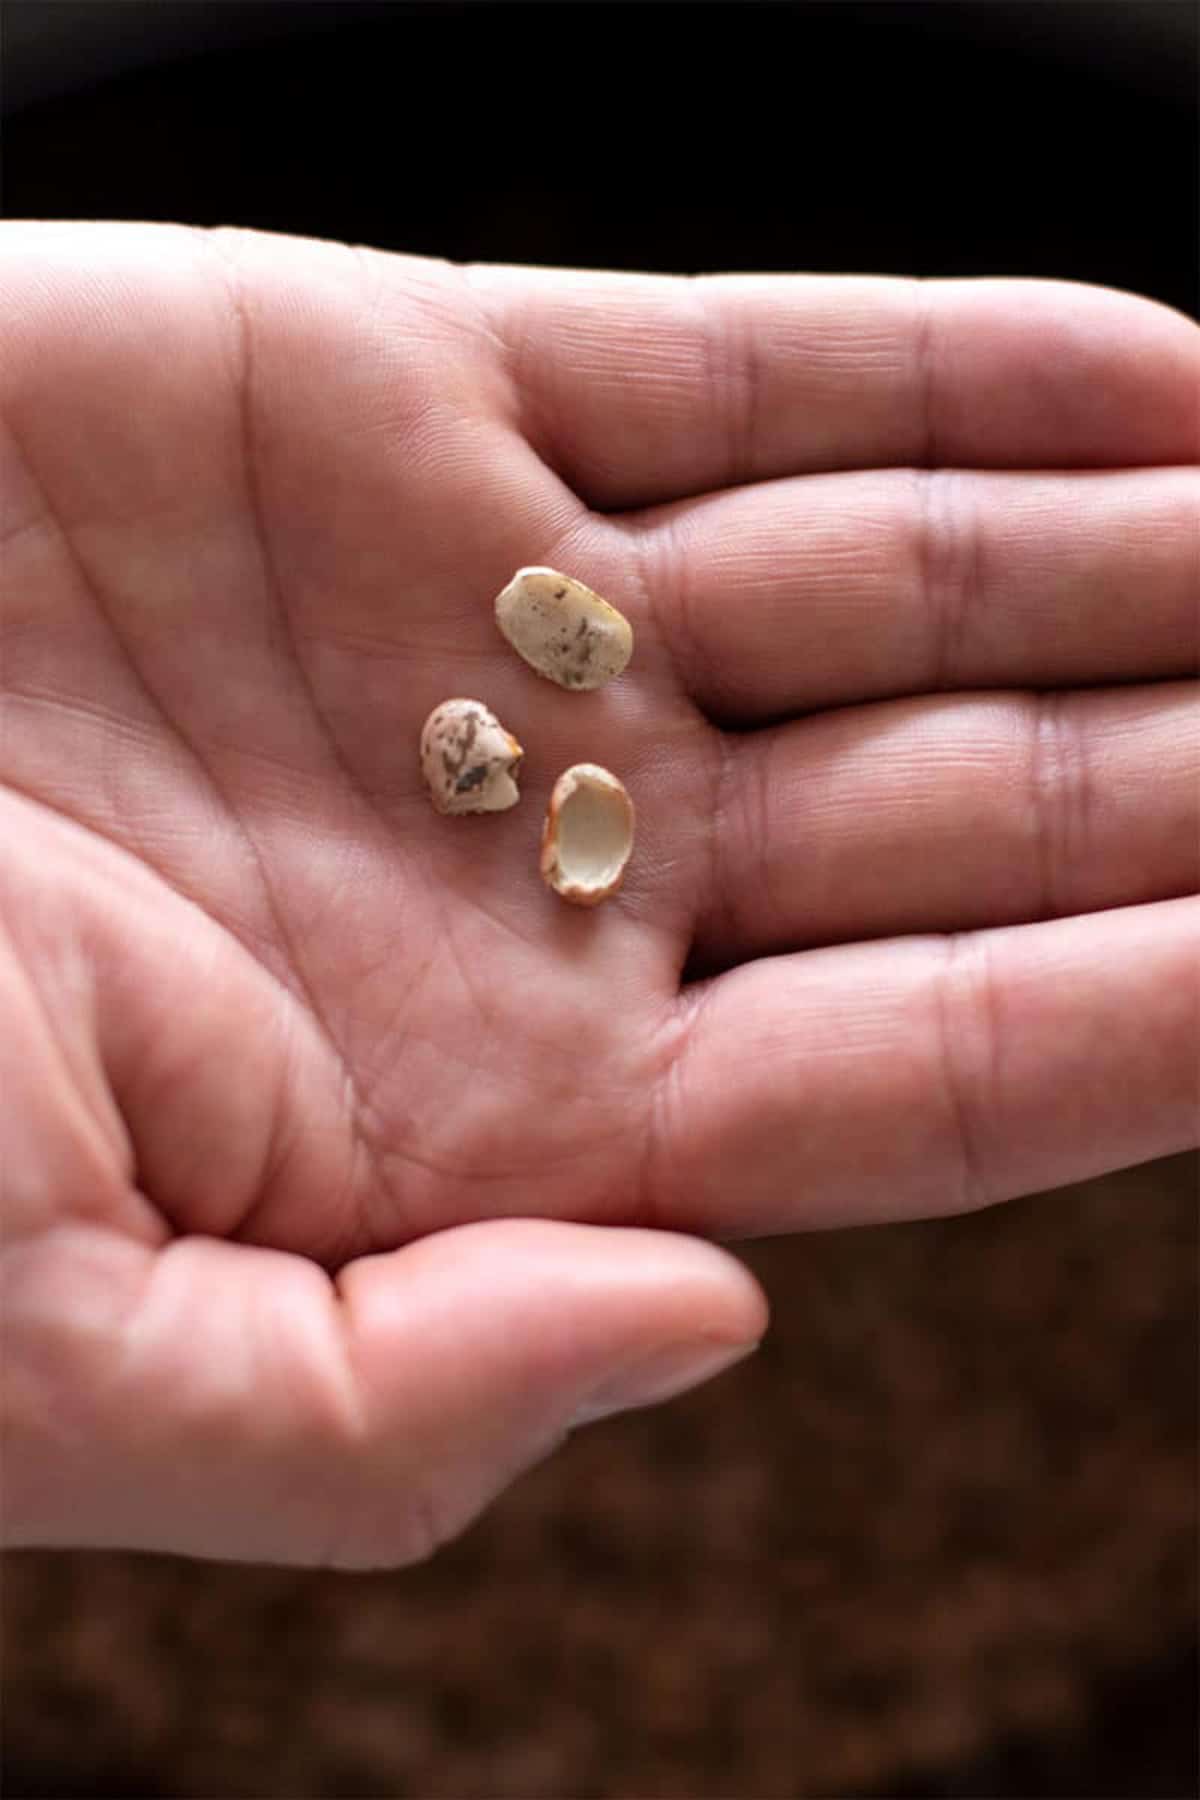 A hand holding broken beans and rocks from a bag of pinto beans.